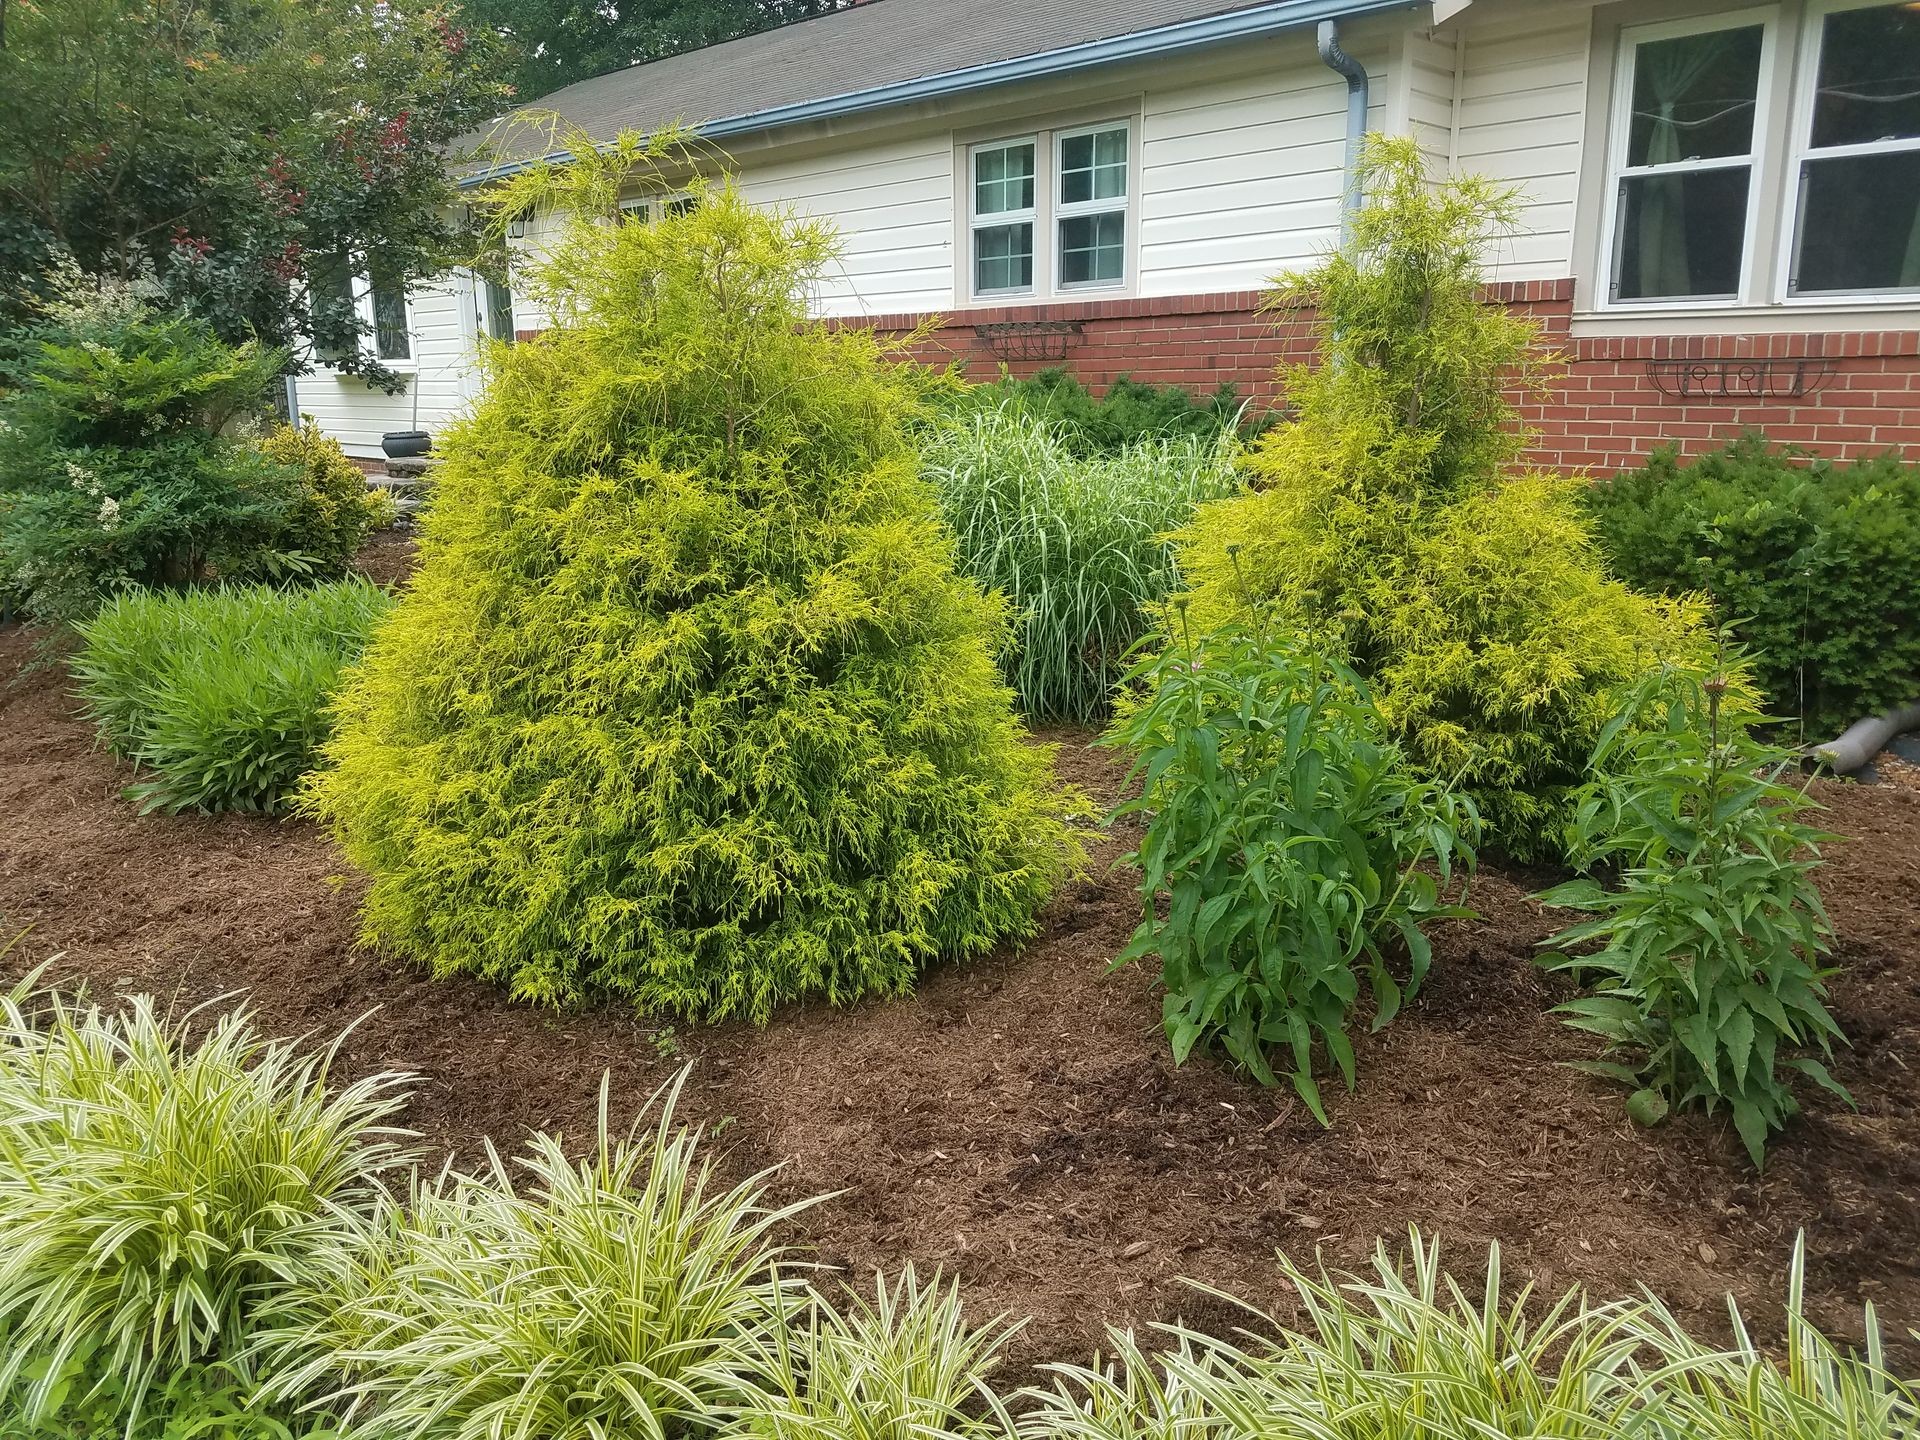 pile of brown mulch and green plants